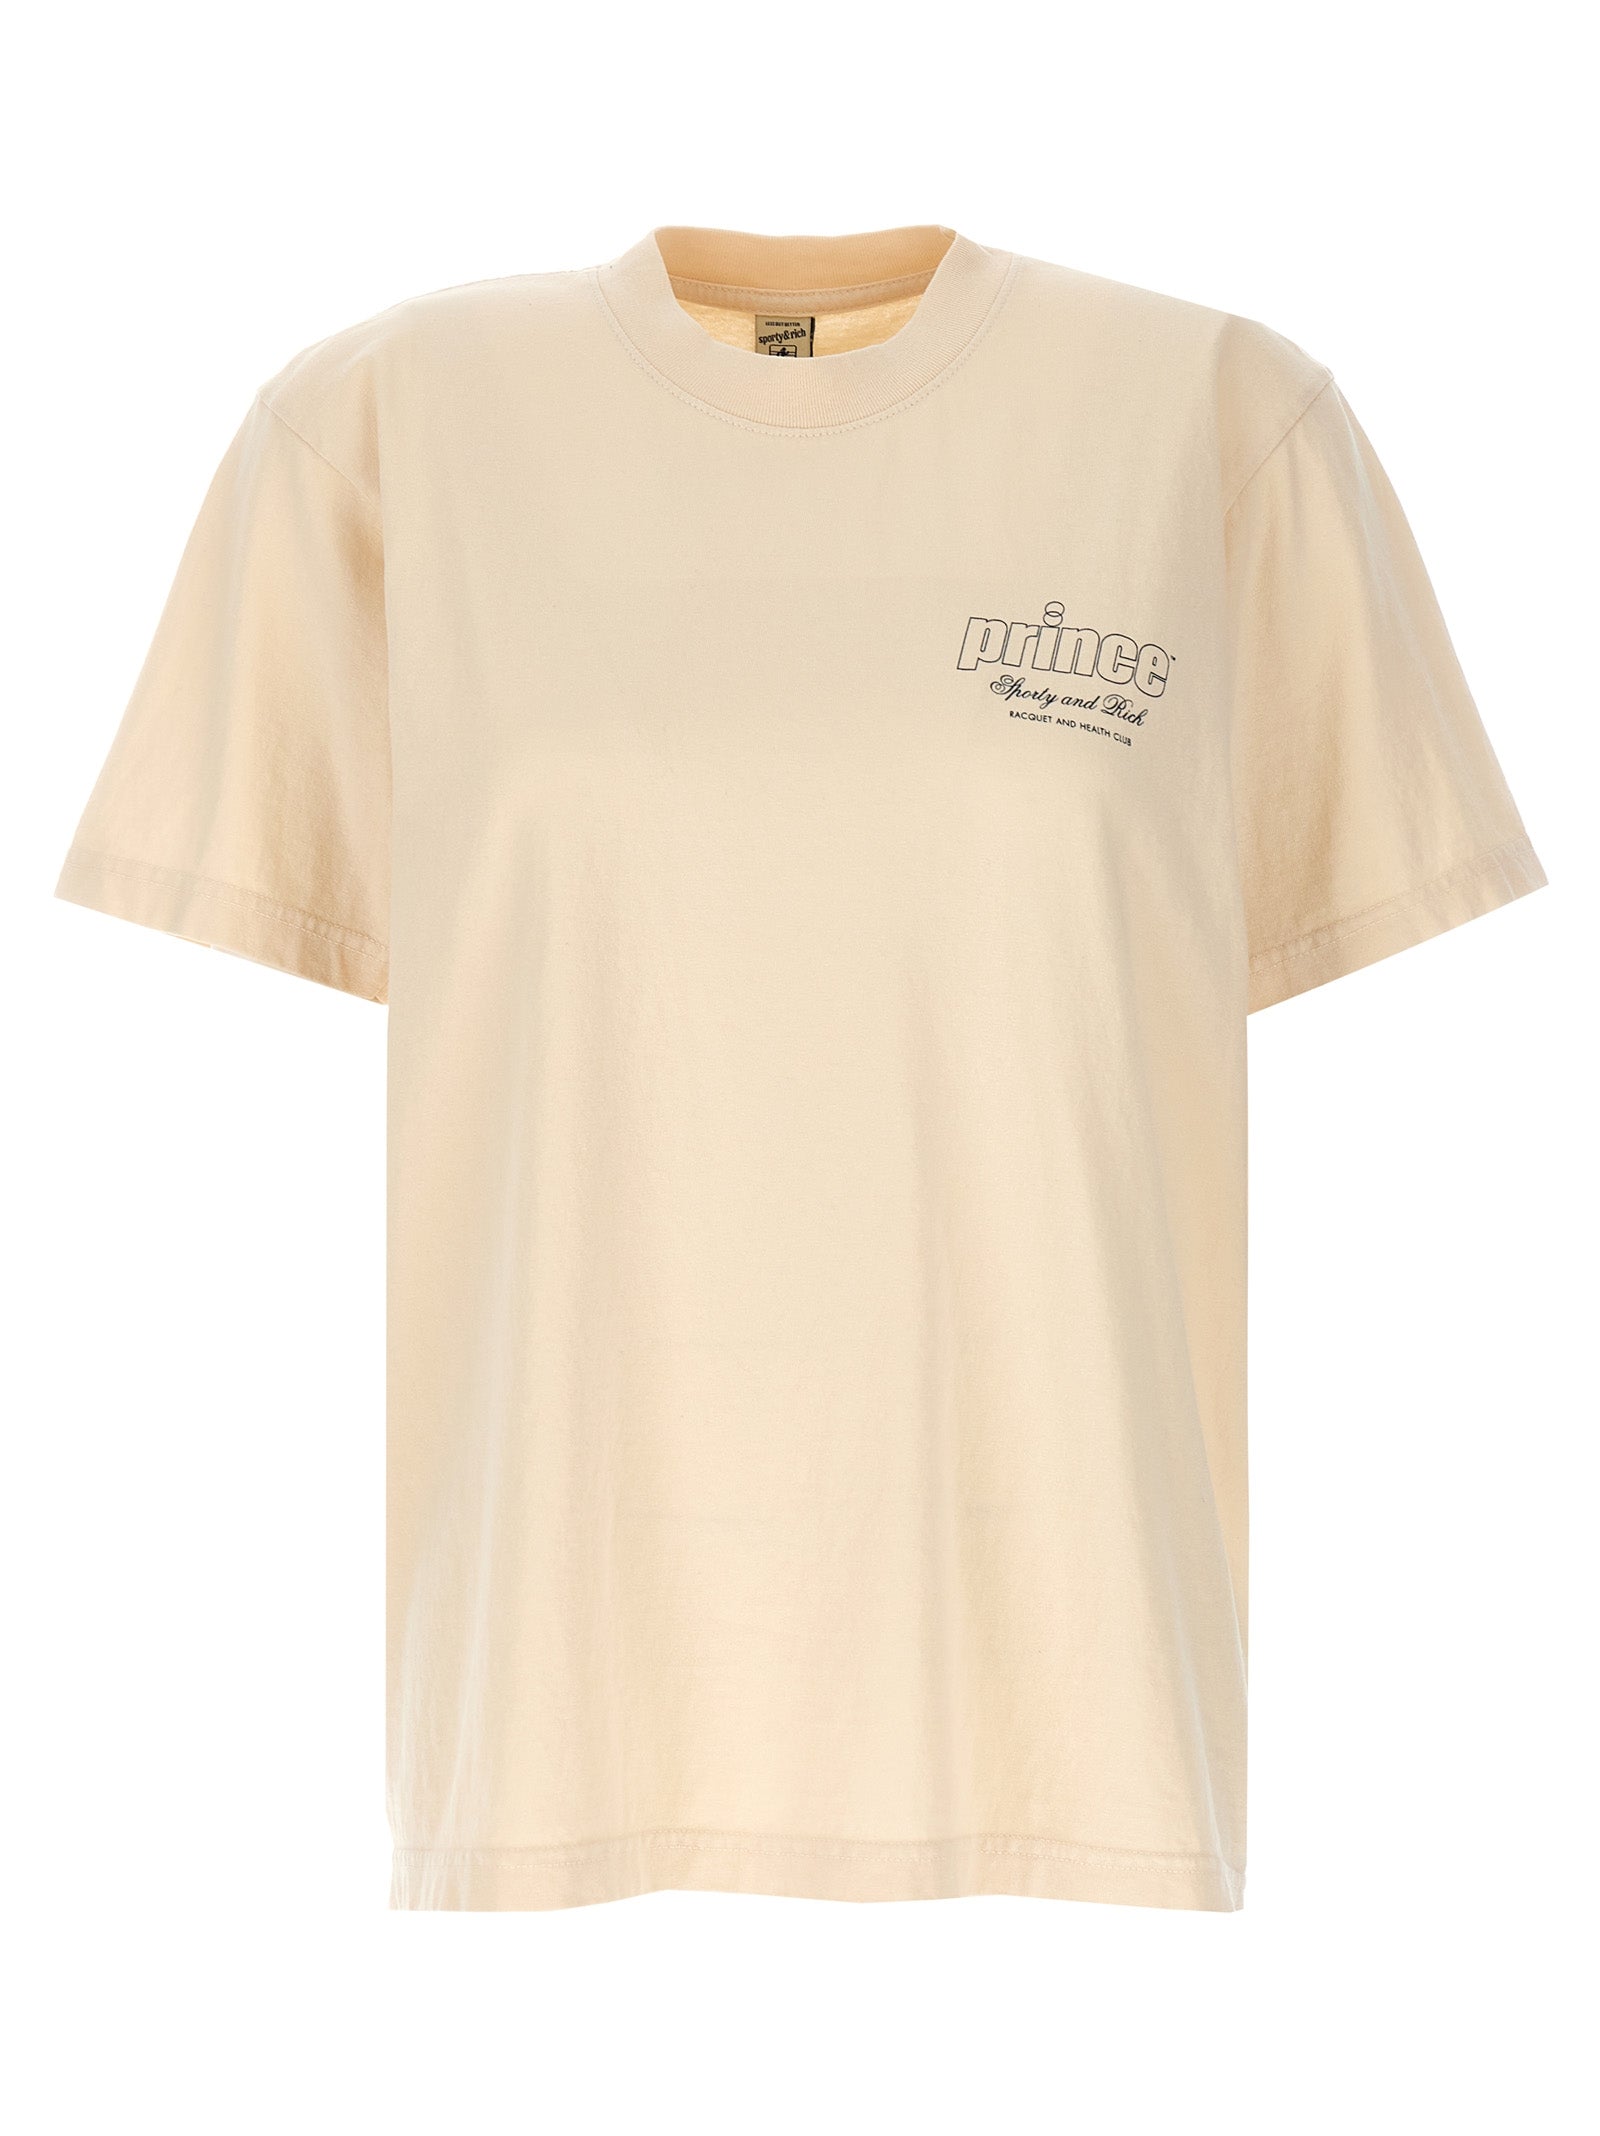 Shop Sporty And Rich Prince Health T-shirt Beige